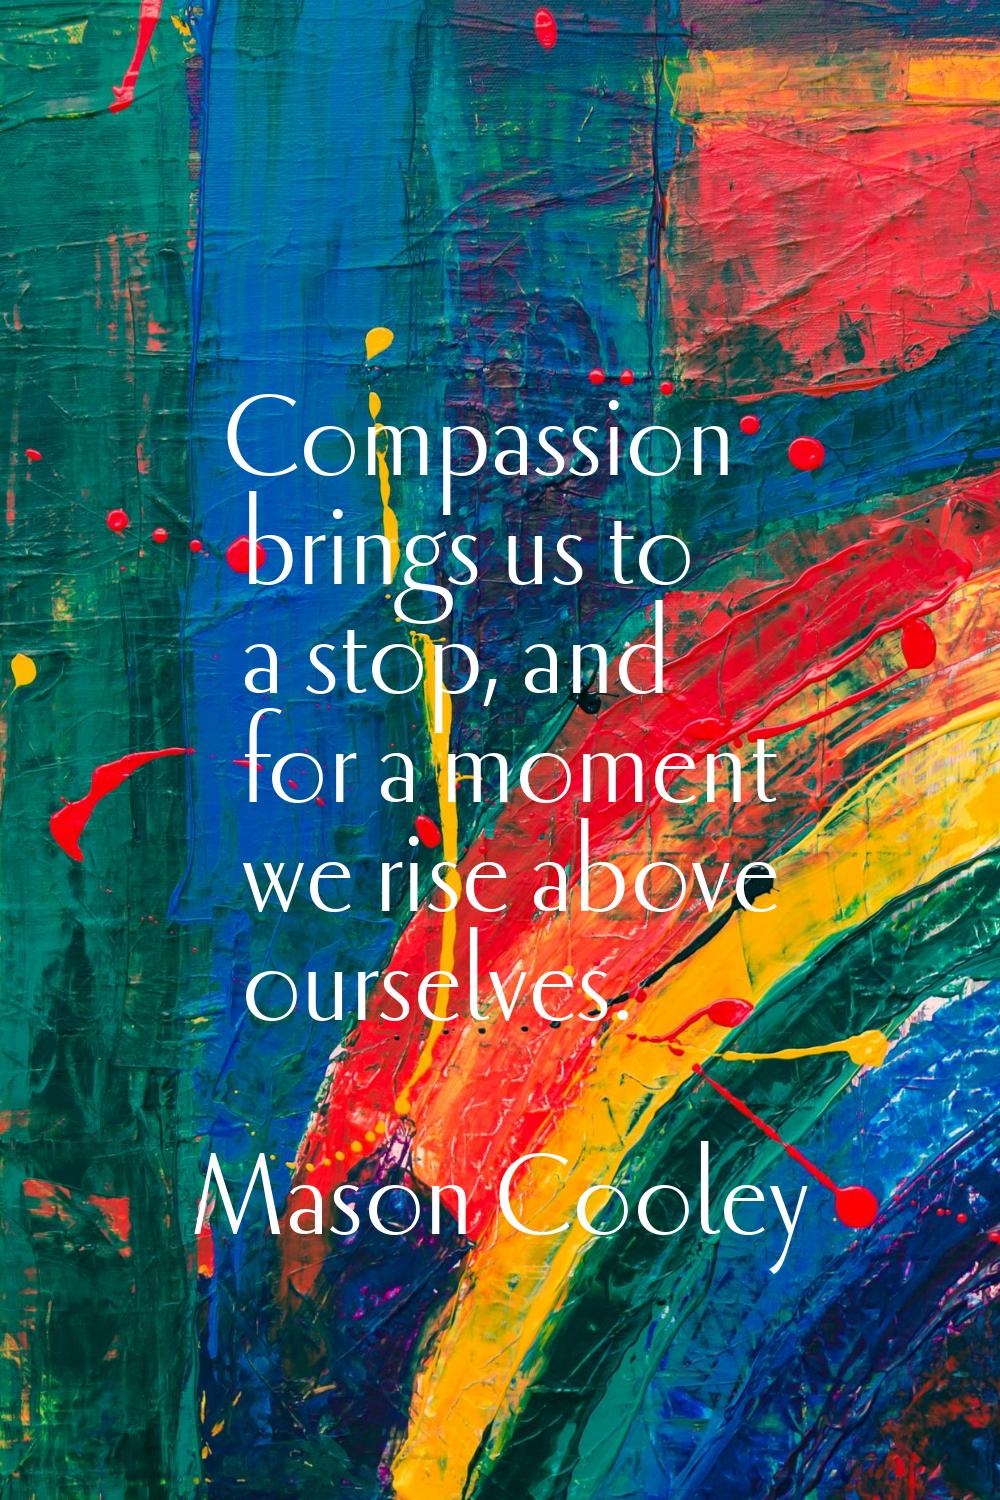 Compassion brings us to a stop, and for a moment we rise above ourselves.